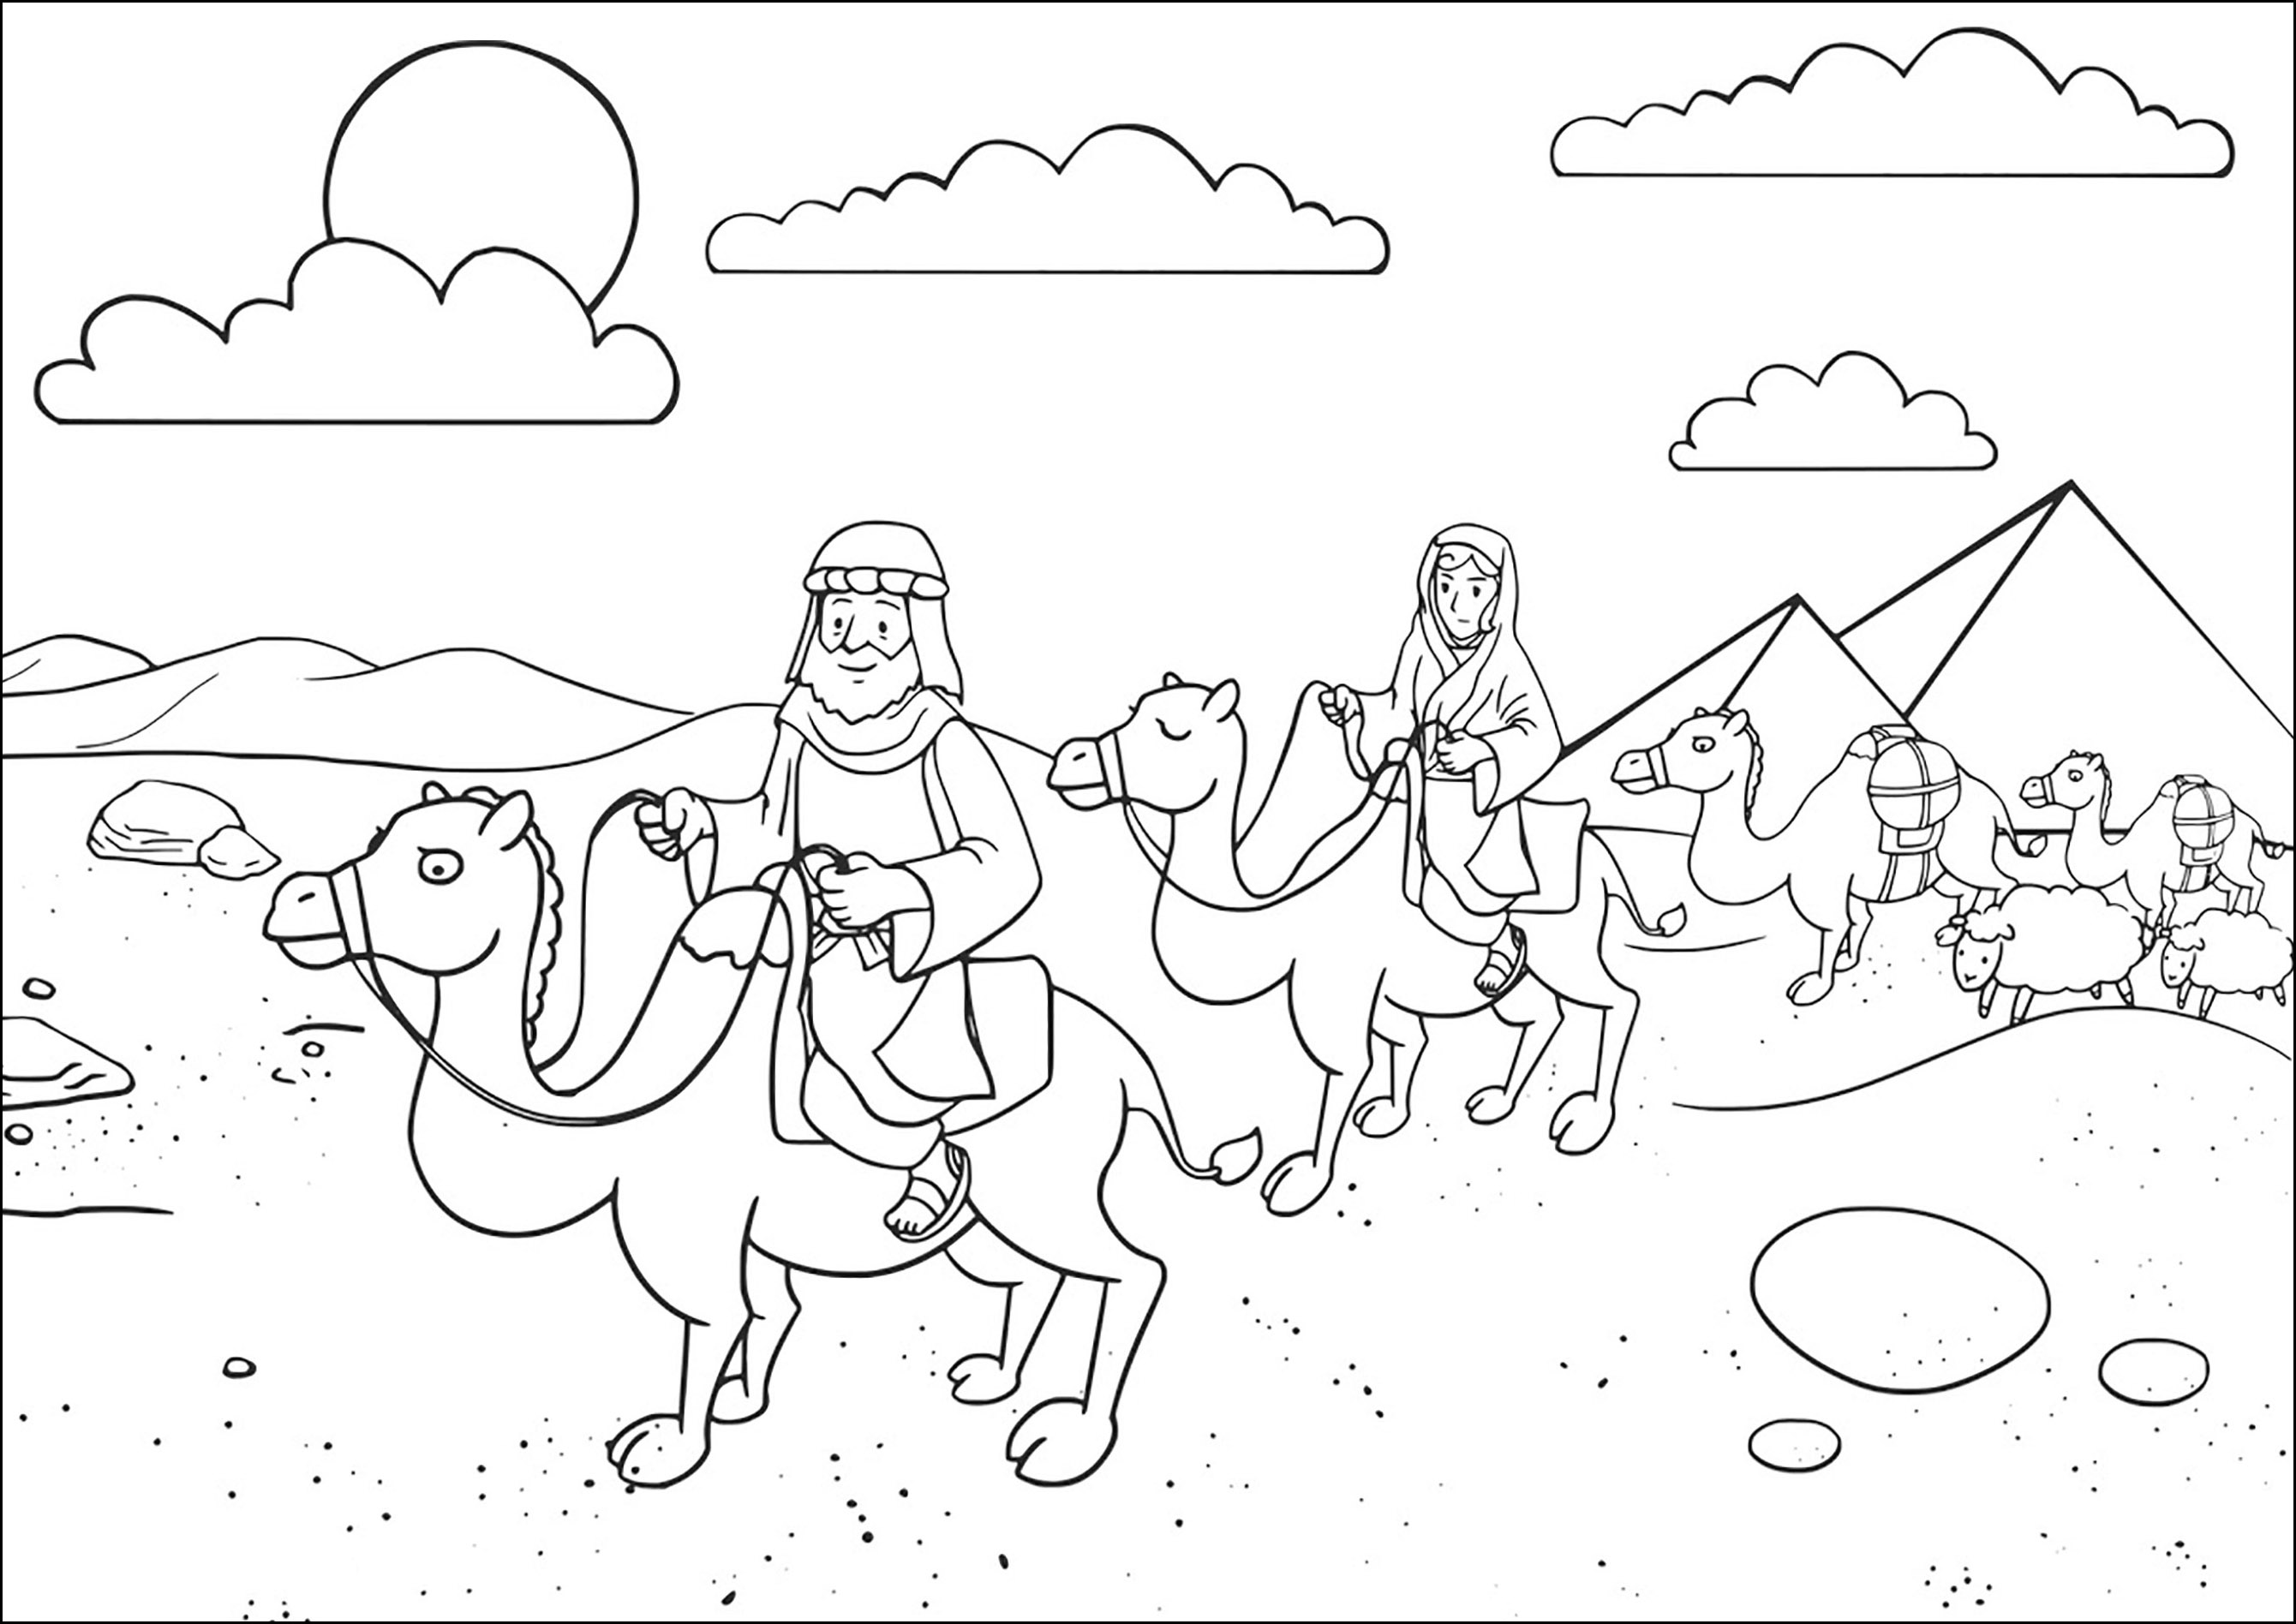 Abraham in the desert with camels. In the Bible, Abraham married his half-sister, Sarah, and began a long journey, detailed in the Book of Genesis (chapters 12 to 25), from Mesopotamia to Haran, then later to Canaan and Egypt, riding camels.